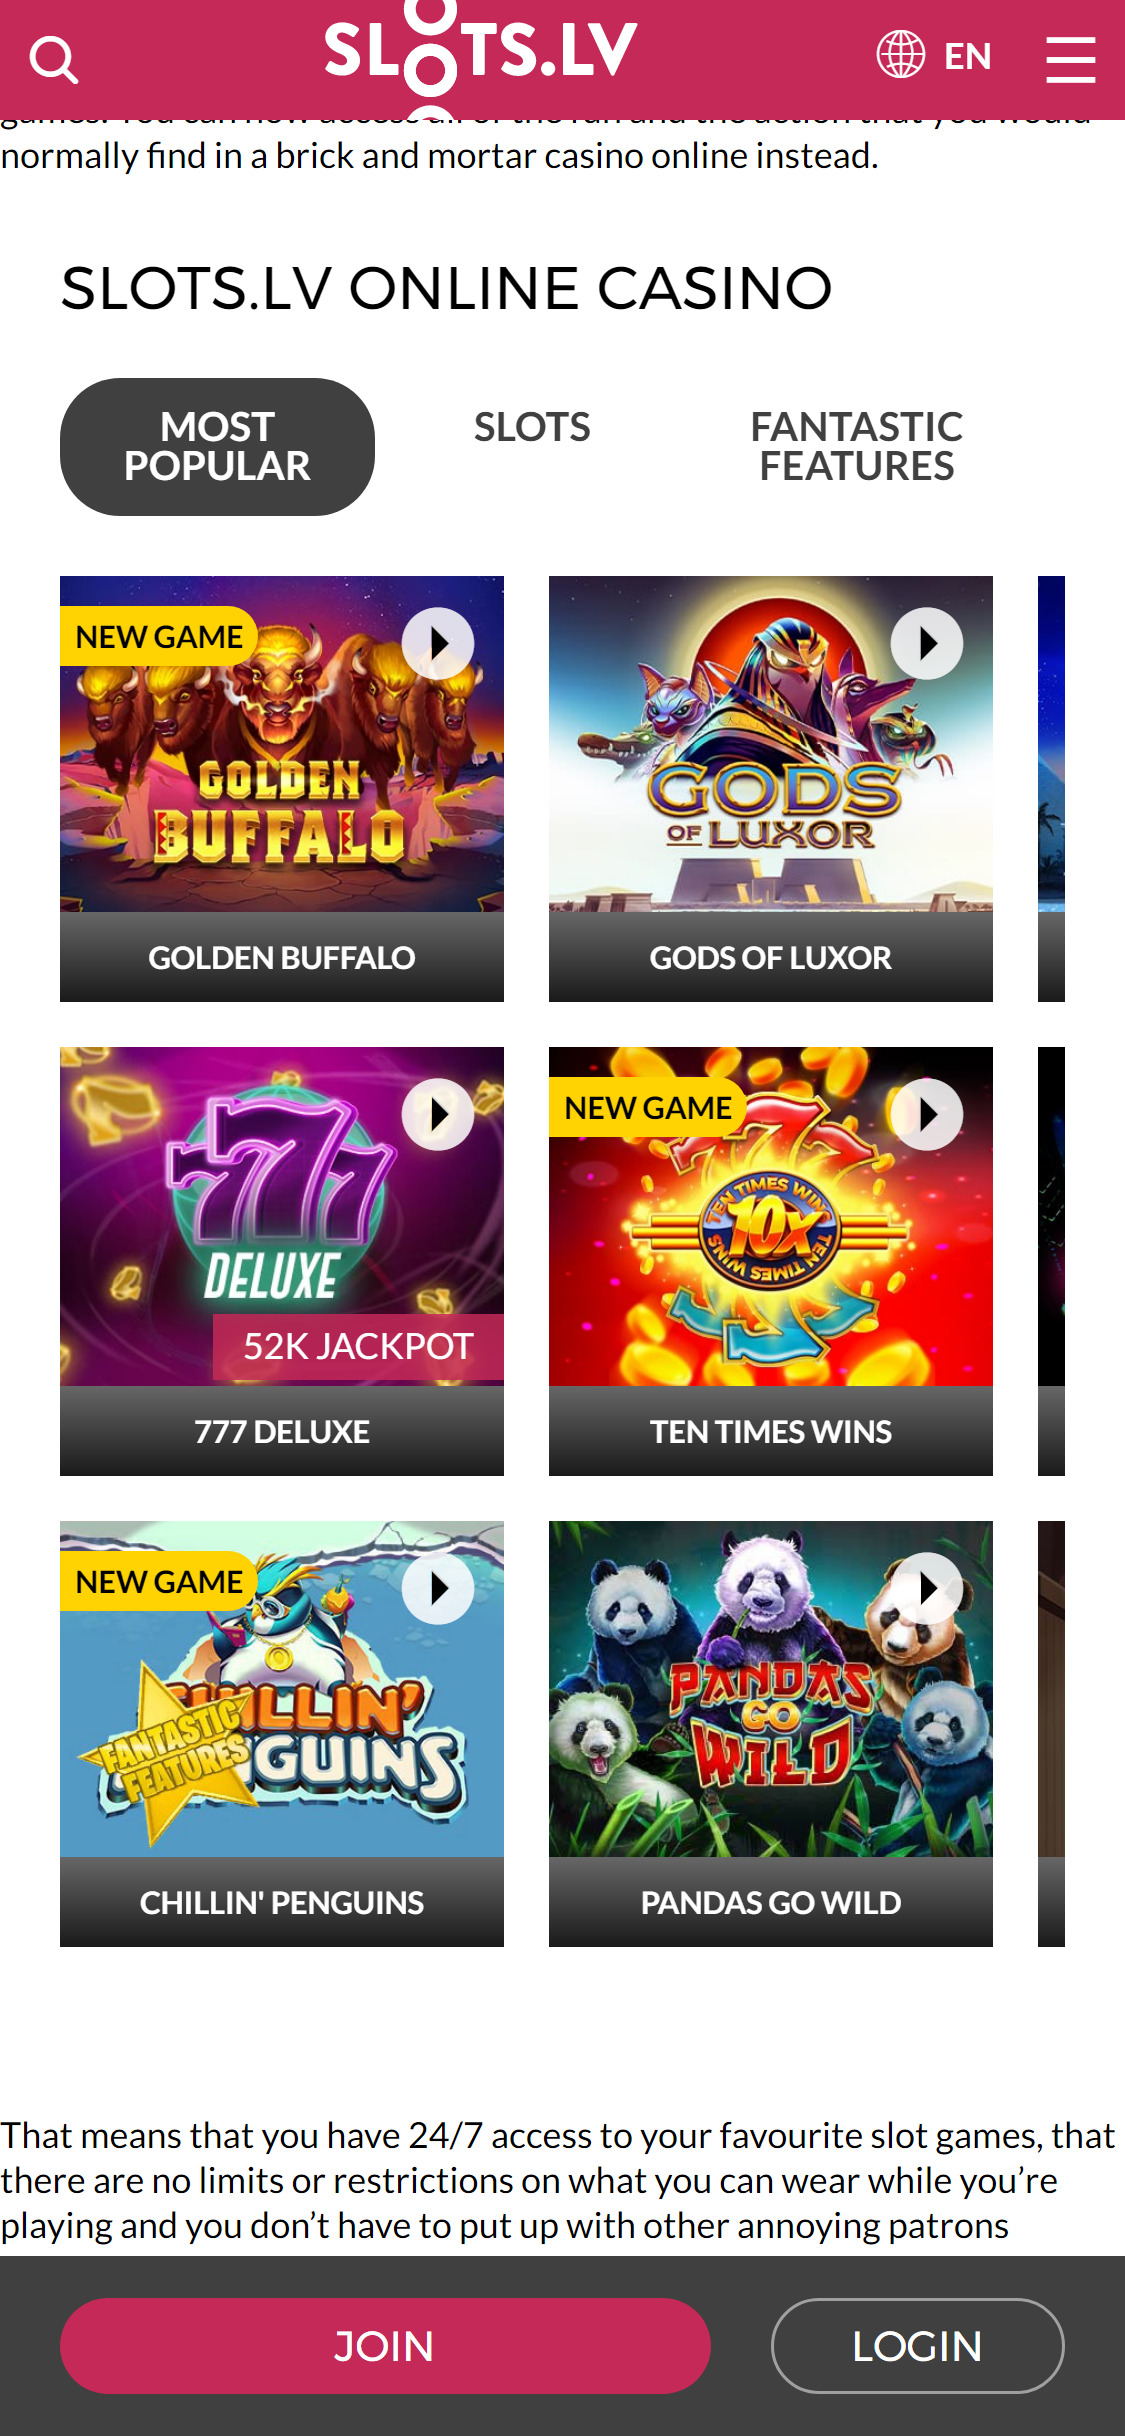 Slots.lv Casino Mobile Games Review